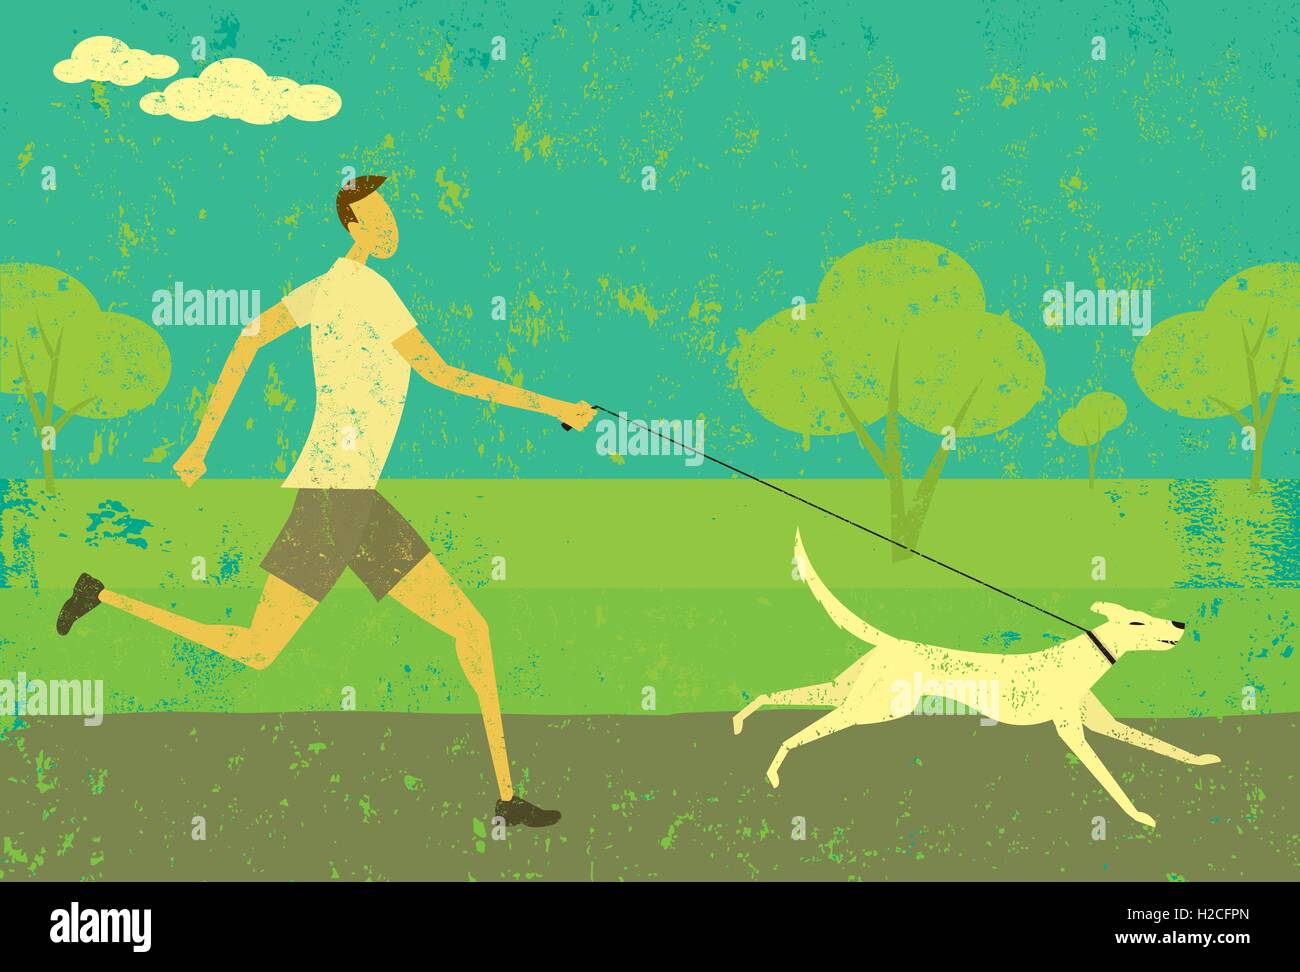 Running with your dog A man running with his dog over an abstract park background. Stock Vector